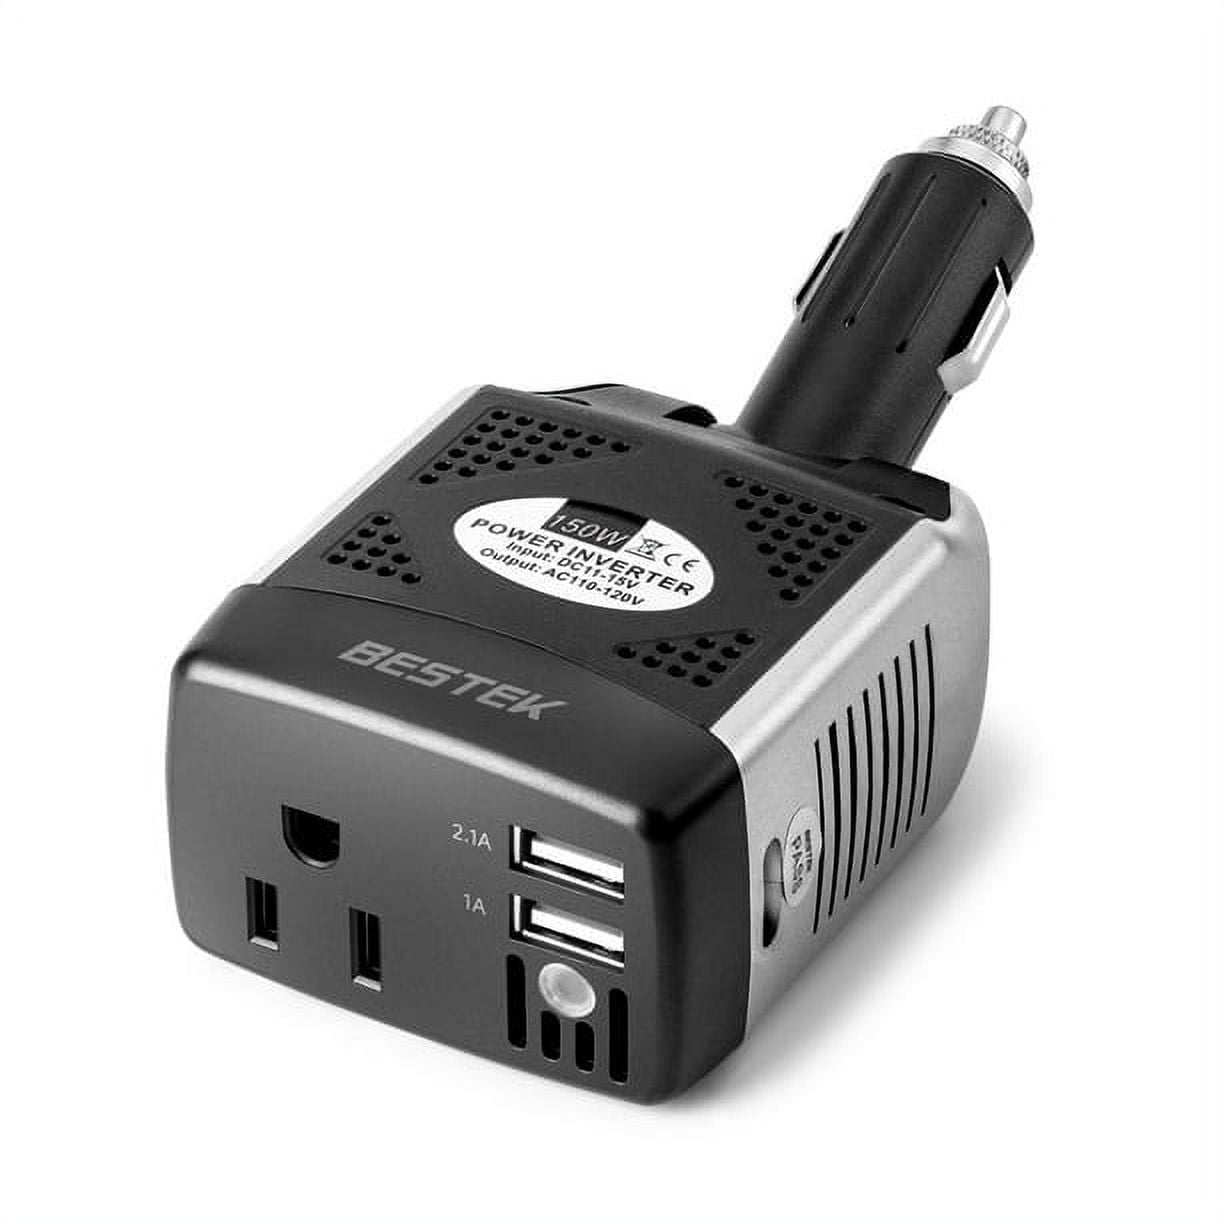 220v to 110v Converter with 2 Type-C 2 USB 3 AC 300W Power Converter Adapter